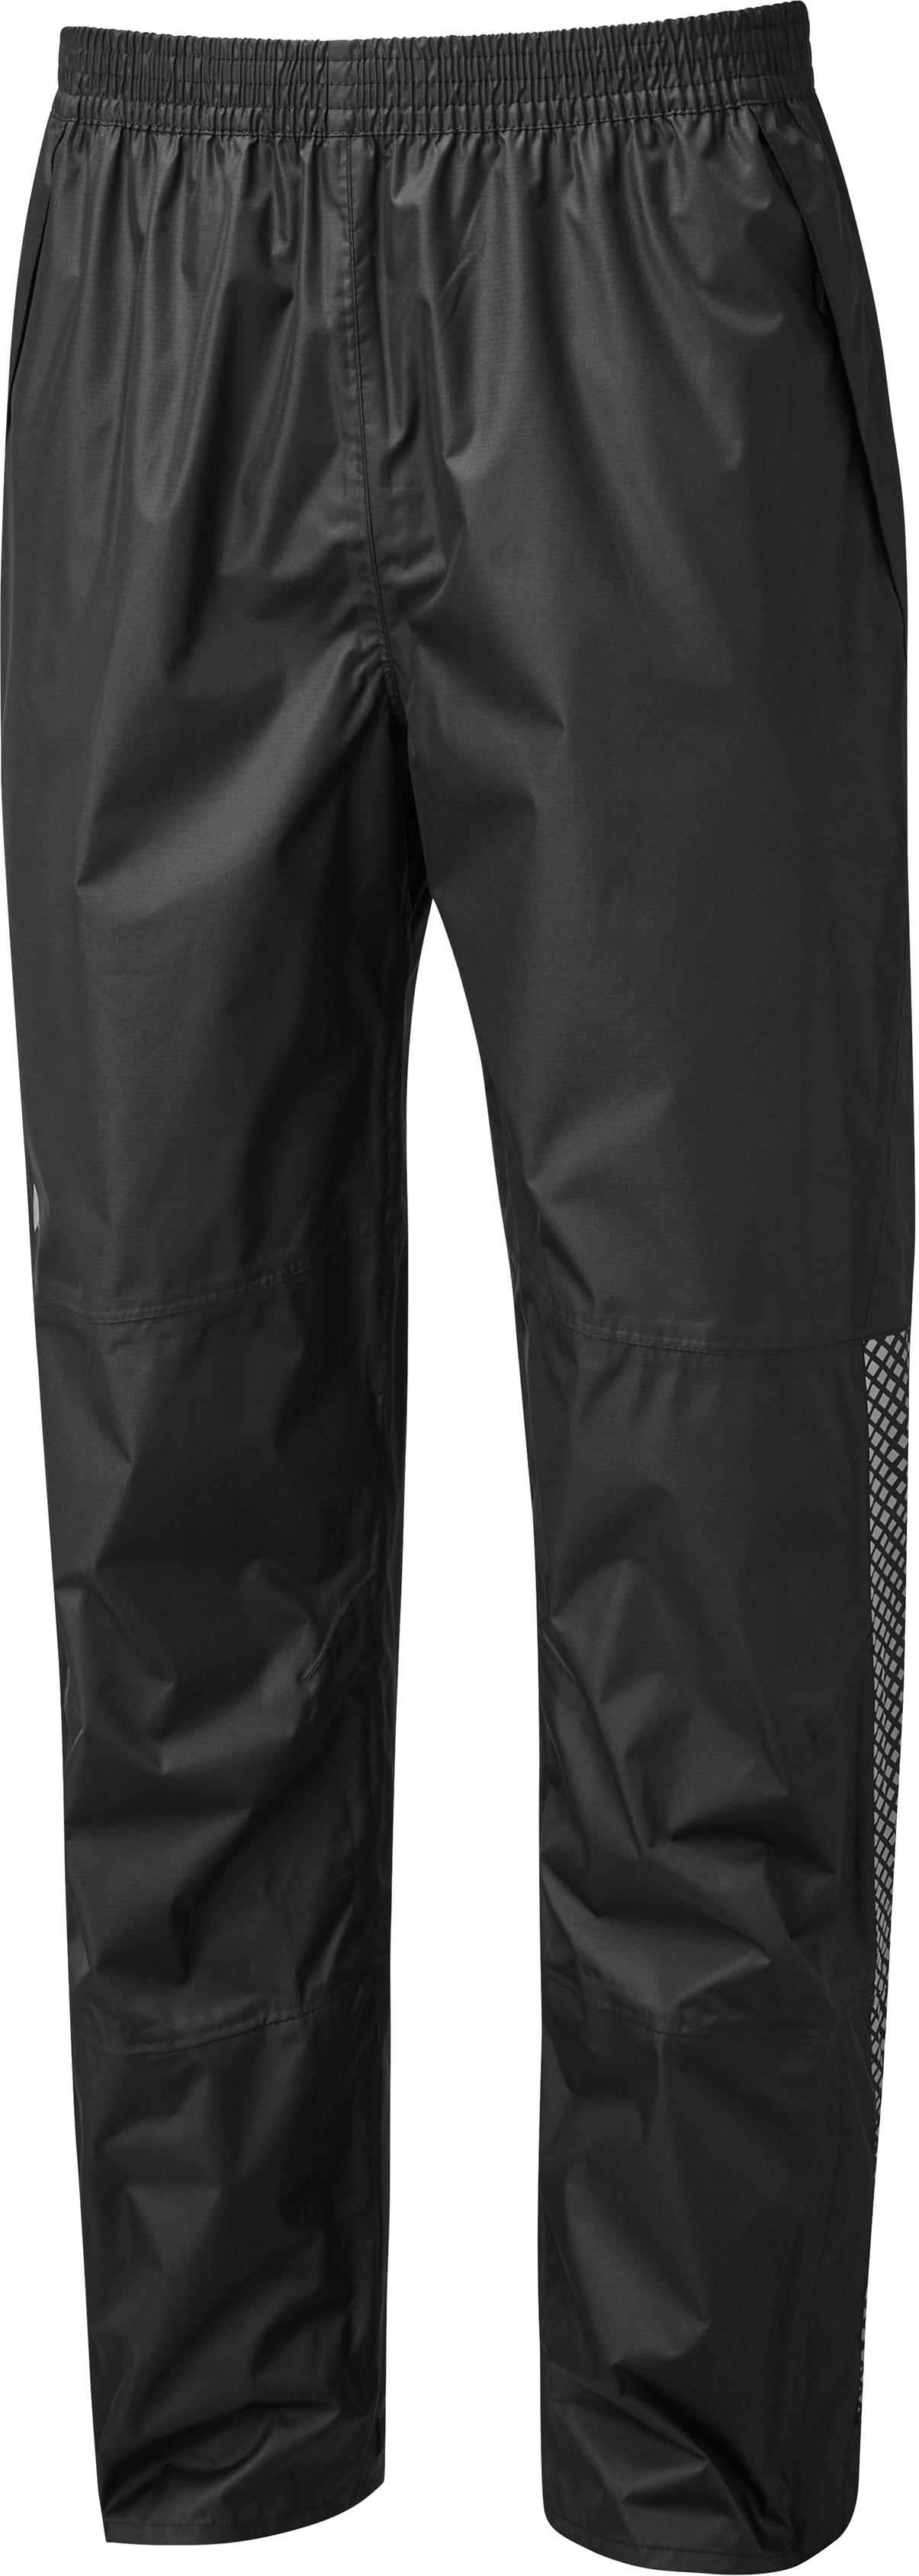 Altura Nightvision Waterproof Overtrouser Black Small